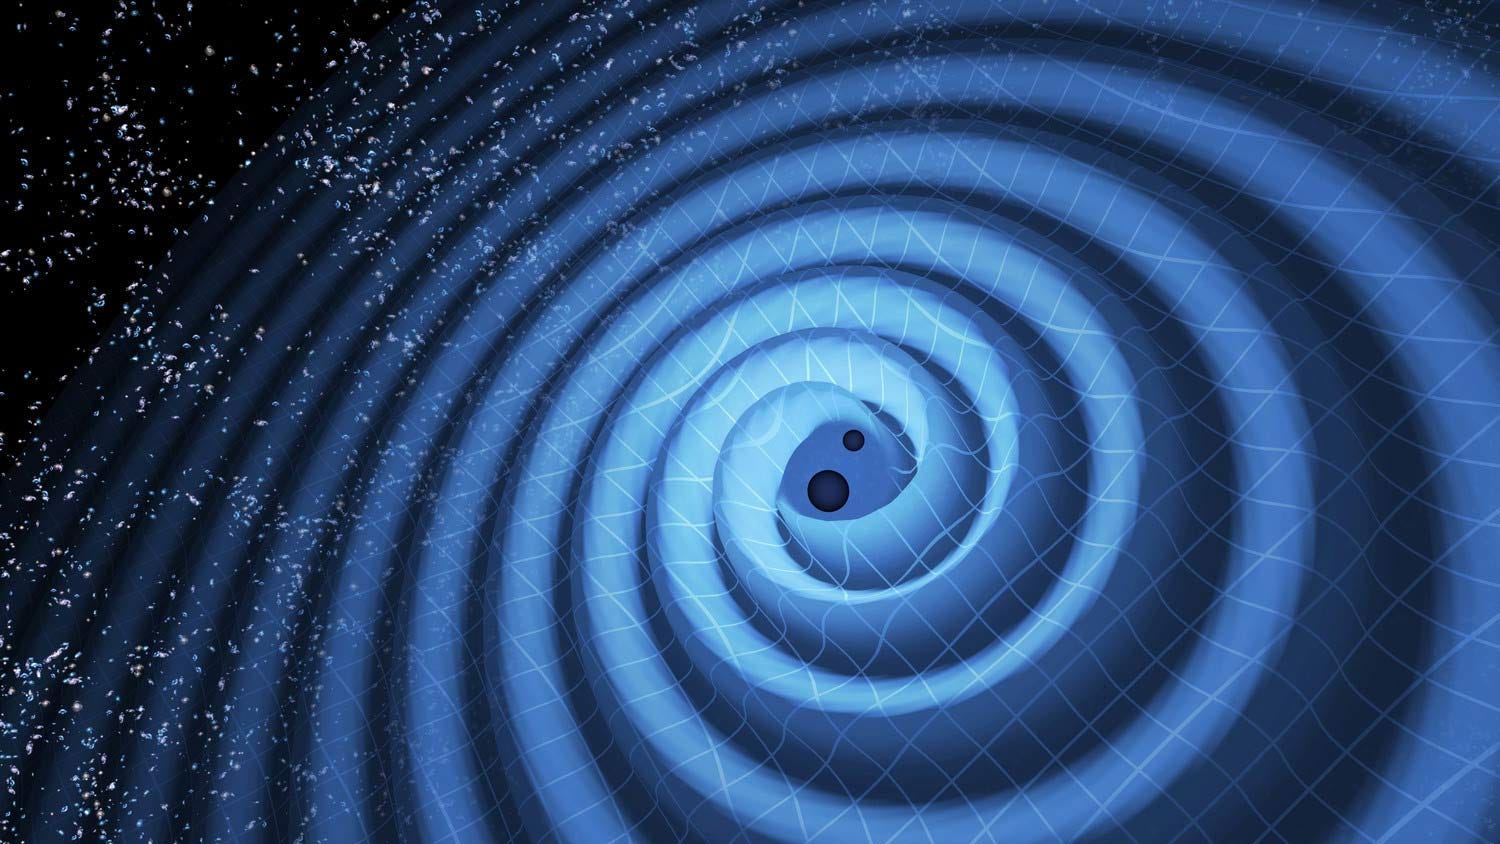 Two black holes, shown as black circles, close together in orbit. The gravitational waves are depicted as ripples moving across a blue grid that represents spacetime.